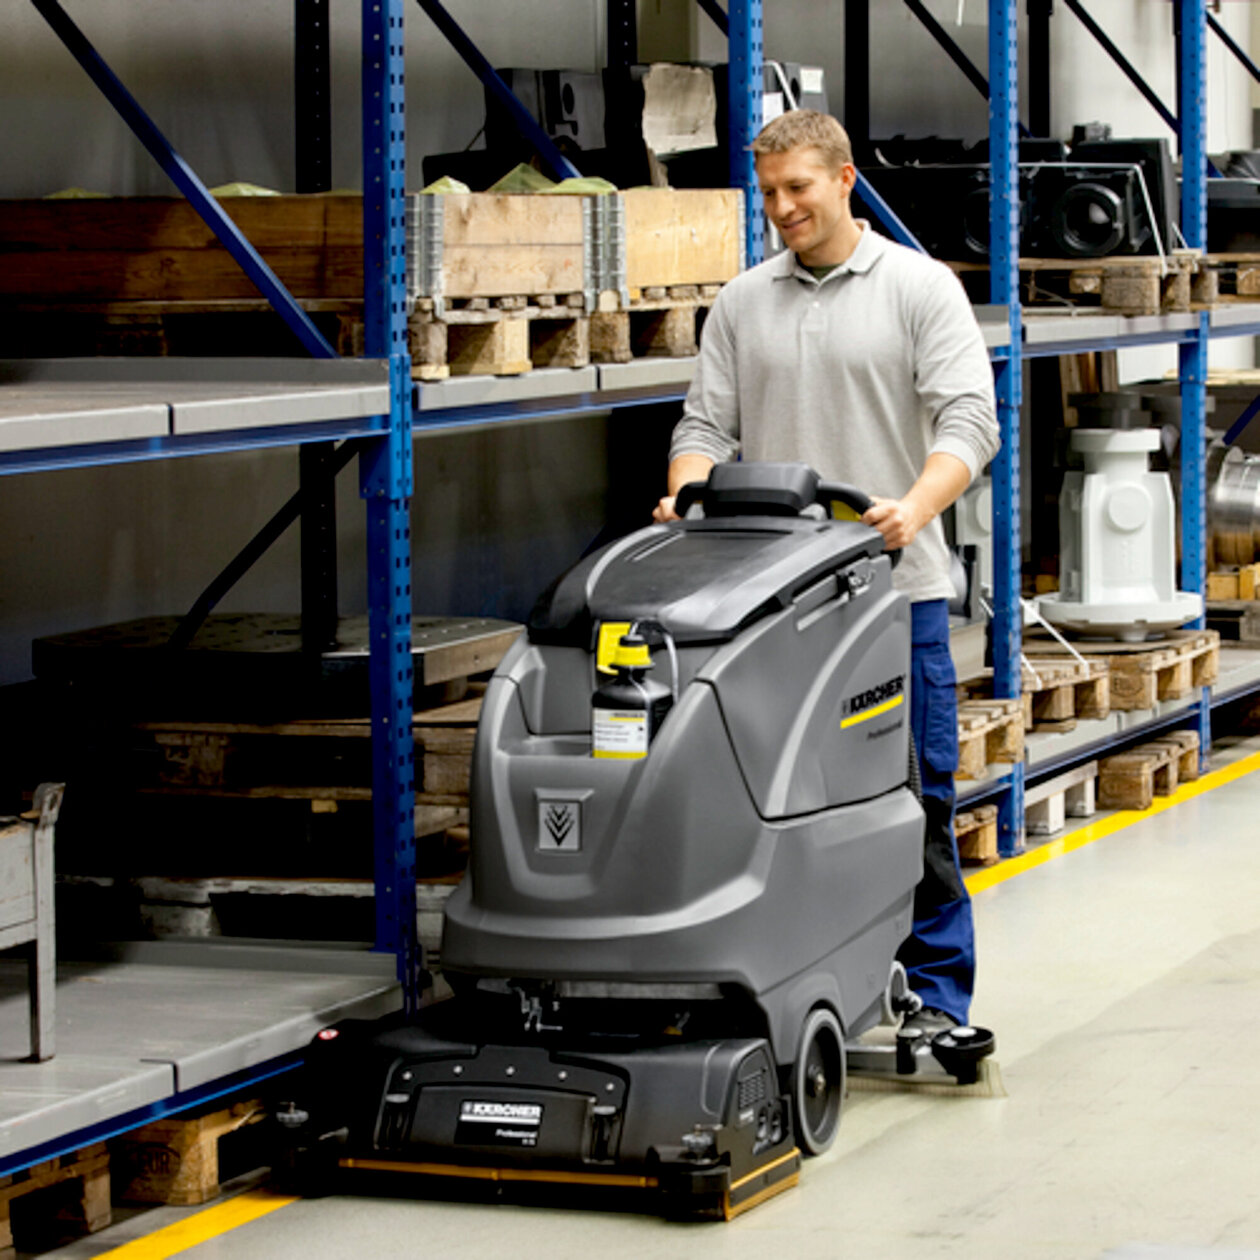 Scrubber Dryer B 80 W: The brush head and squeegee are automatically adjusted